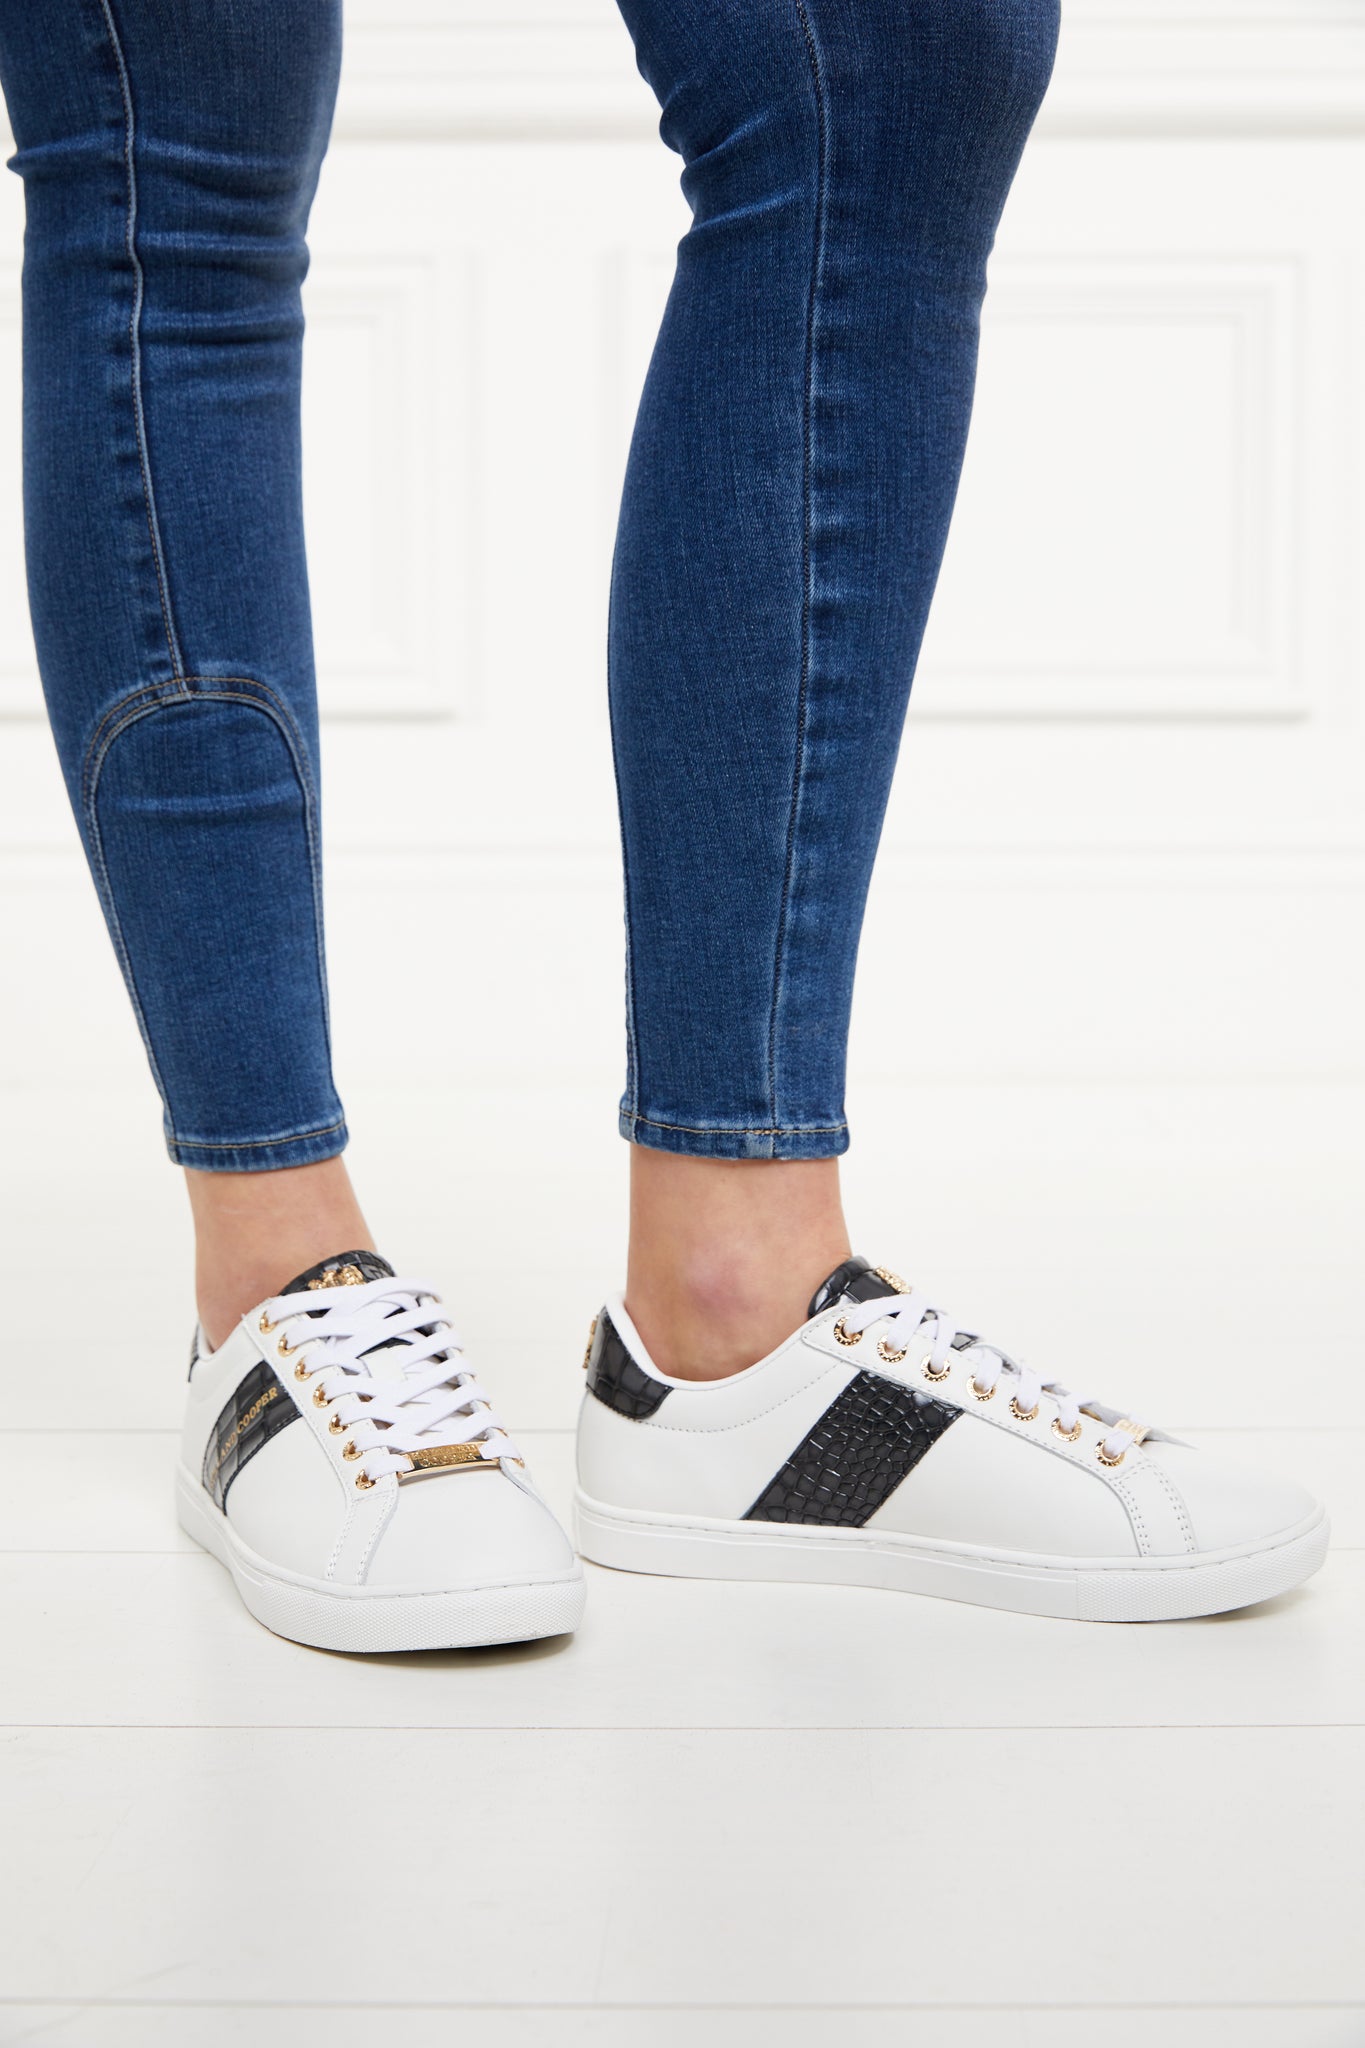 white leather trainers with white laces detailed with a diagonal stripe of black croc embossed leather with gold foil branding and a black croc embossed leather tongue and heel with gold hardware. Worn with skinny denim jeans.